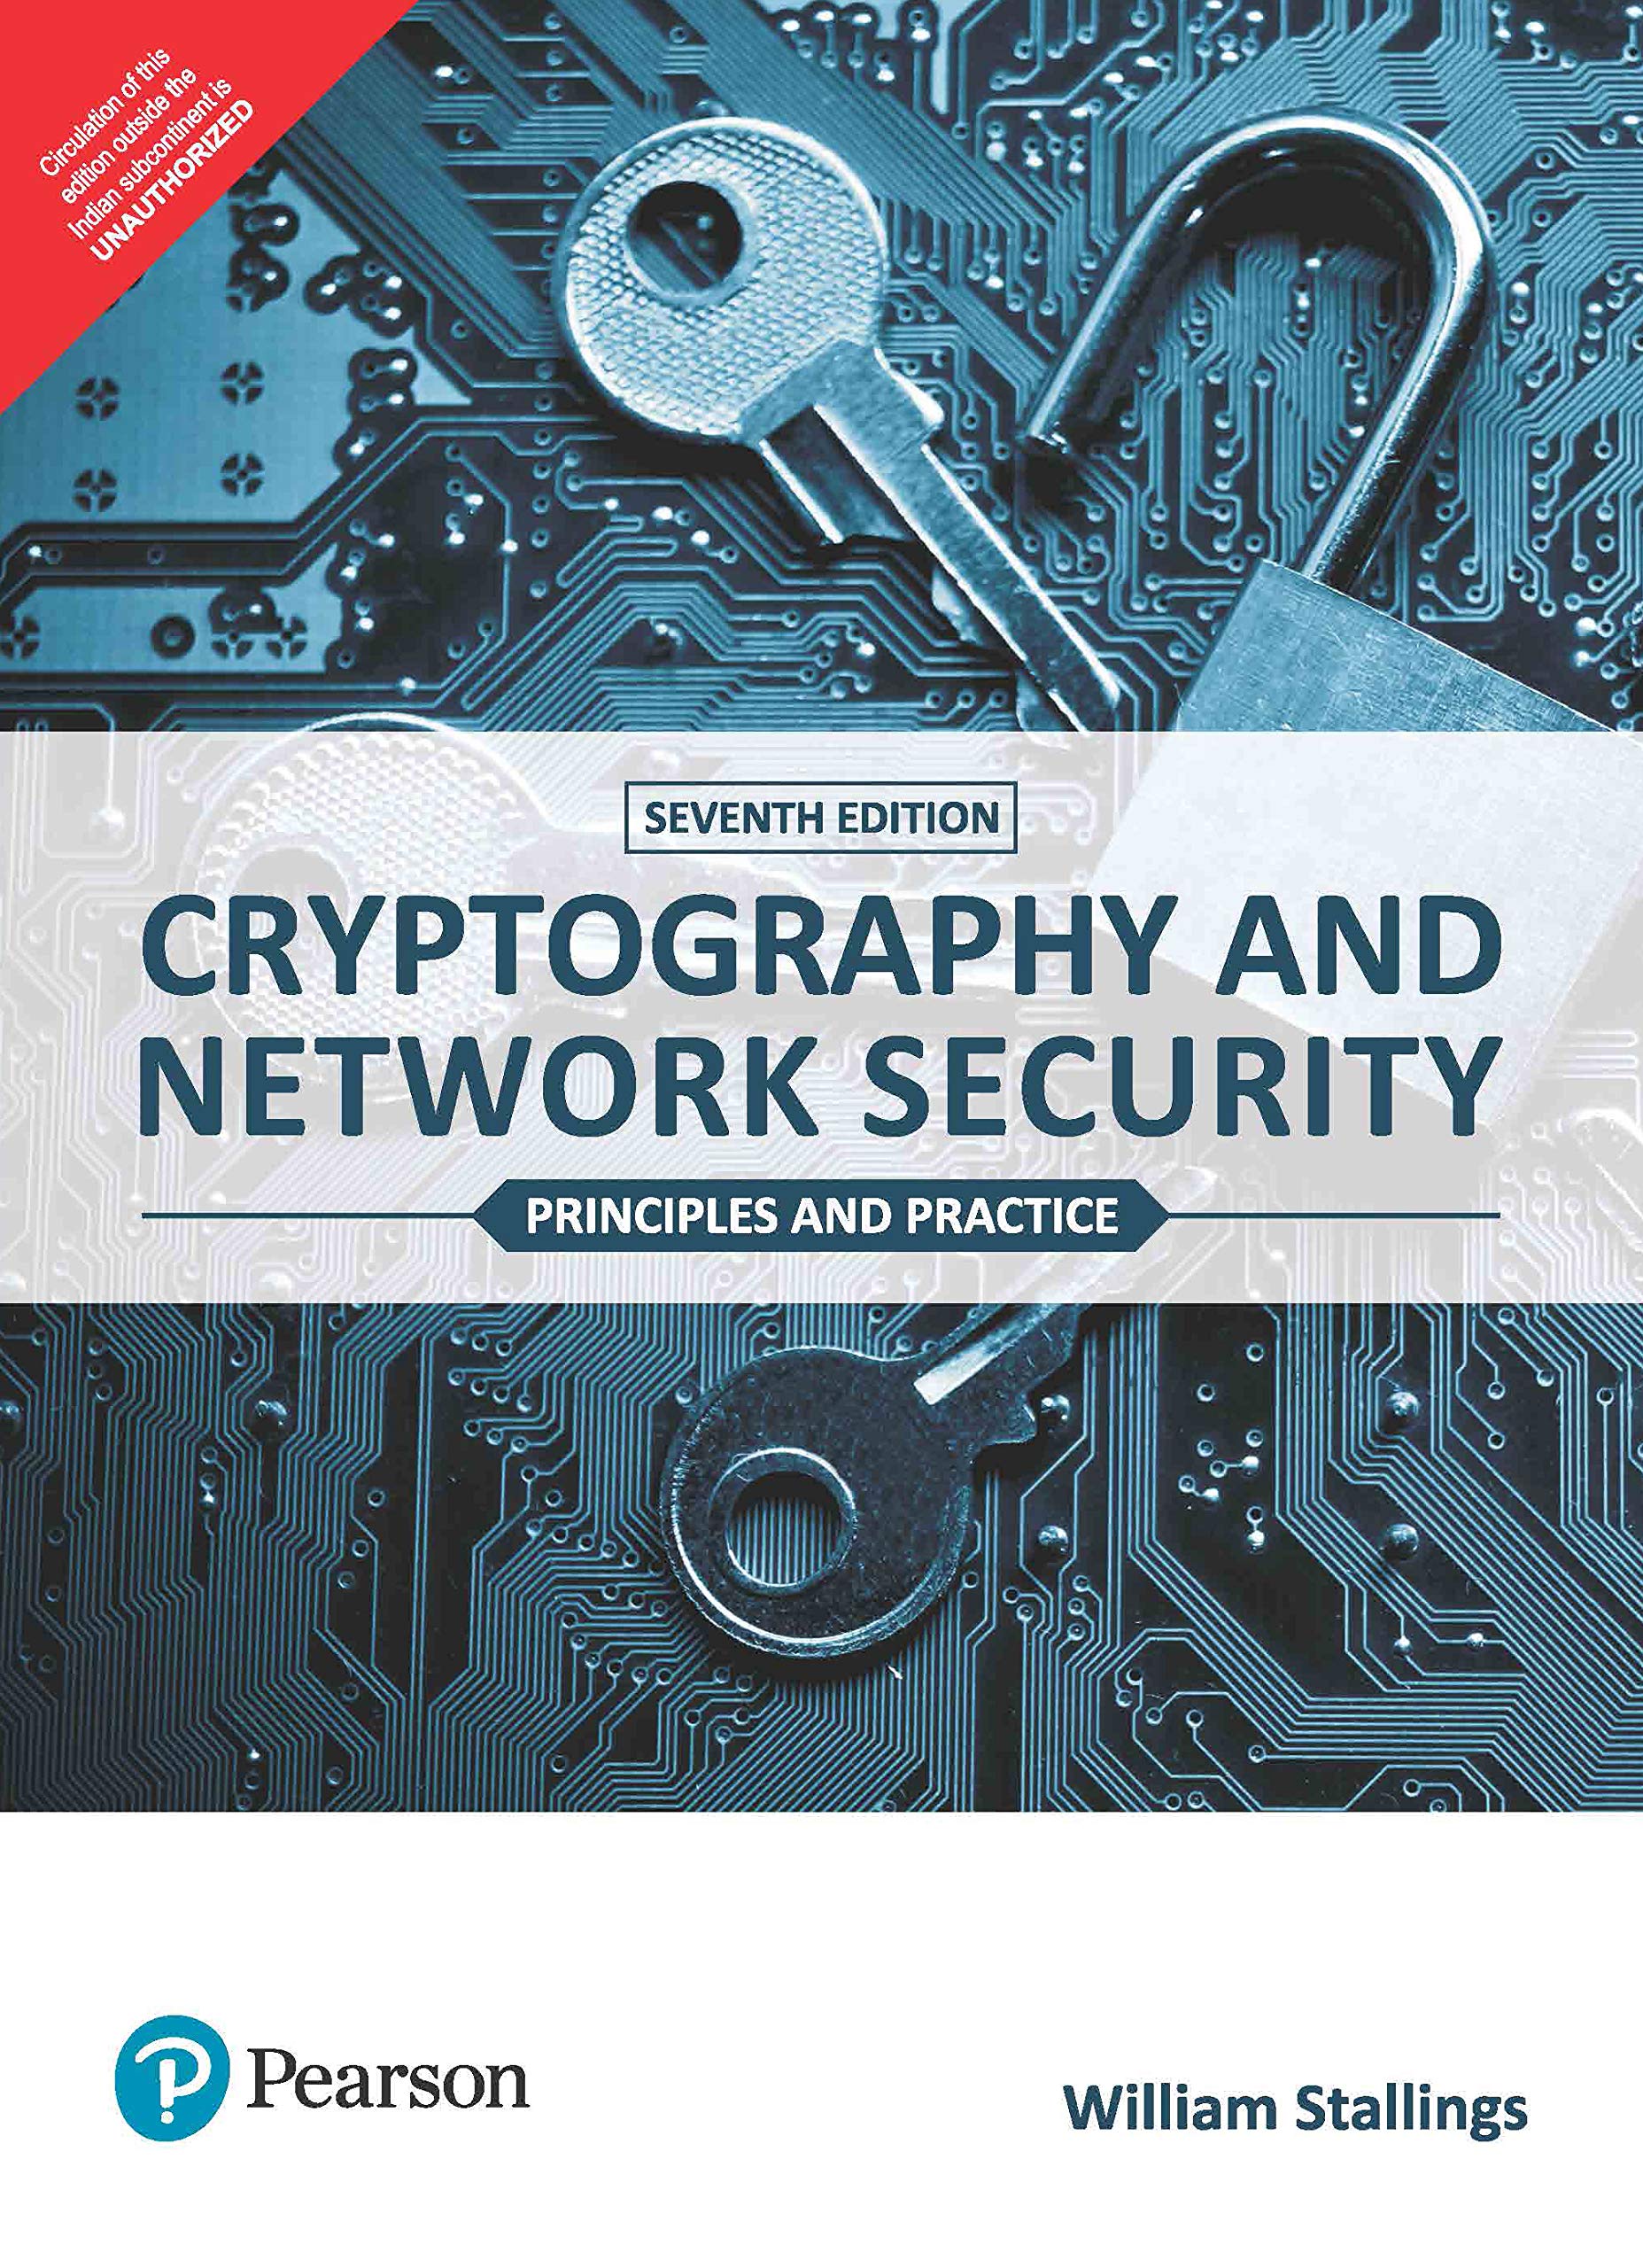 2022-23 III year /sem2 Cryptography and Network Security